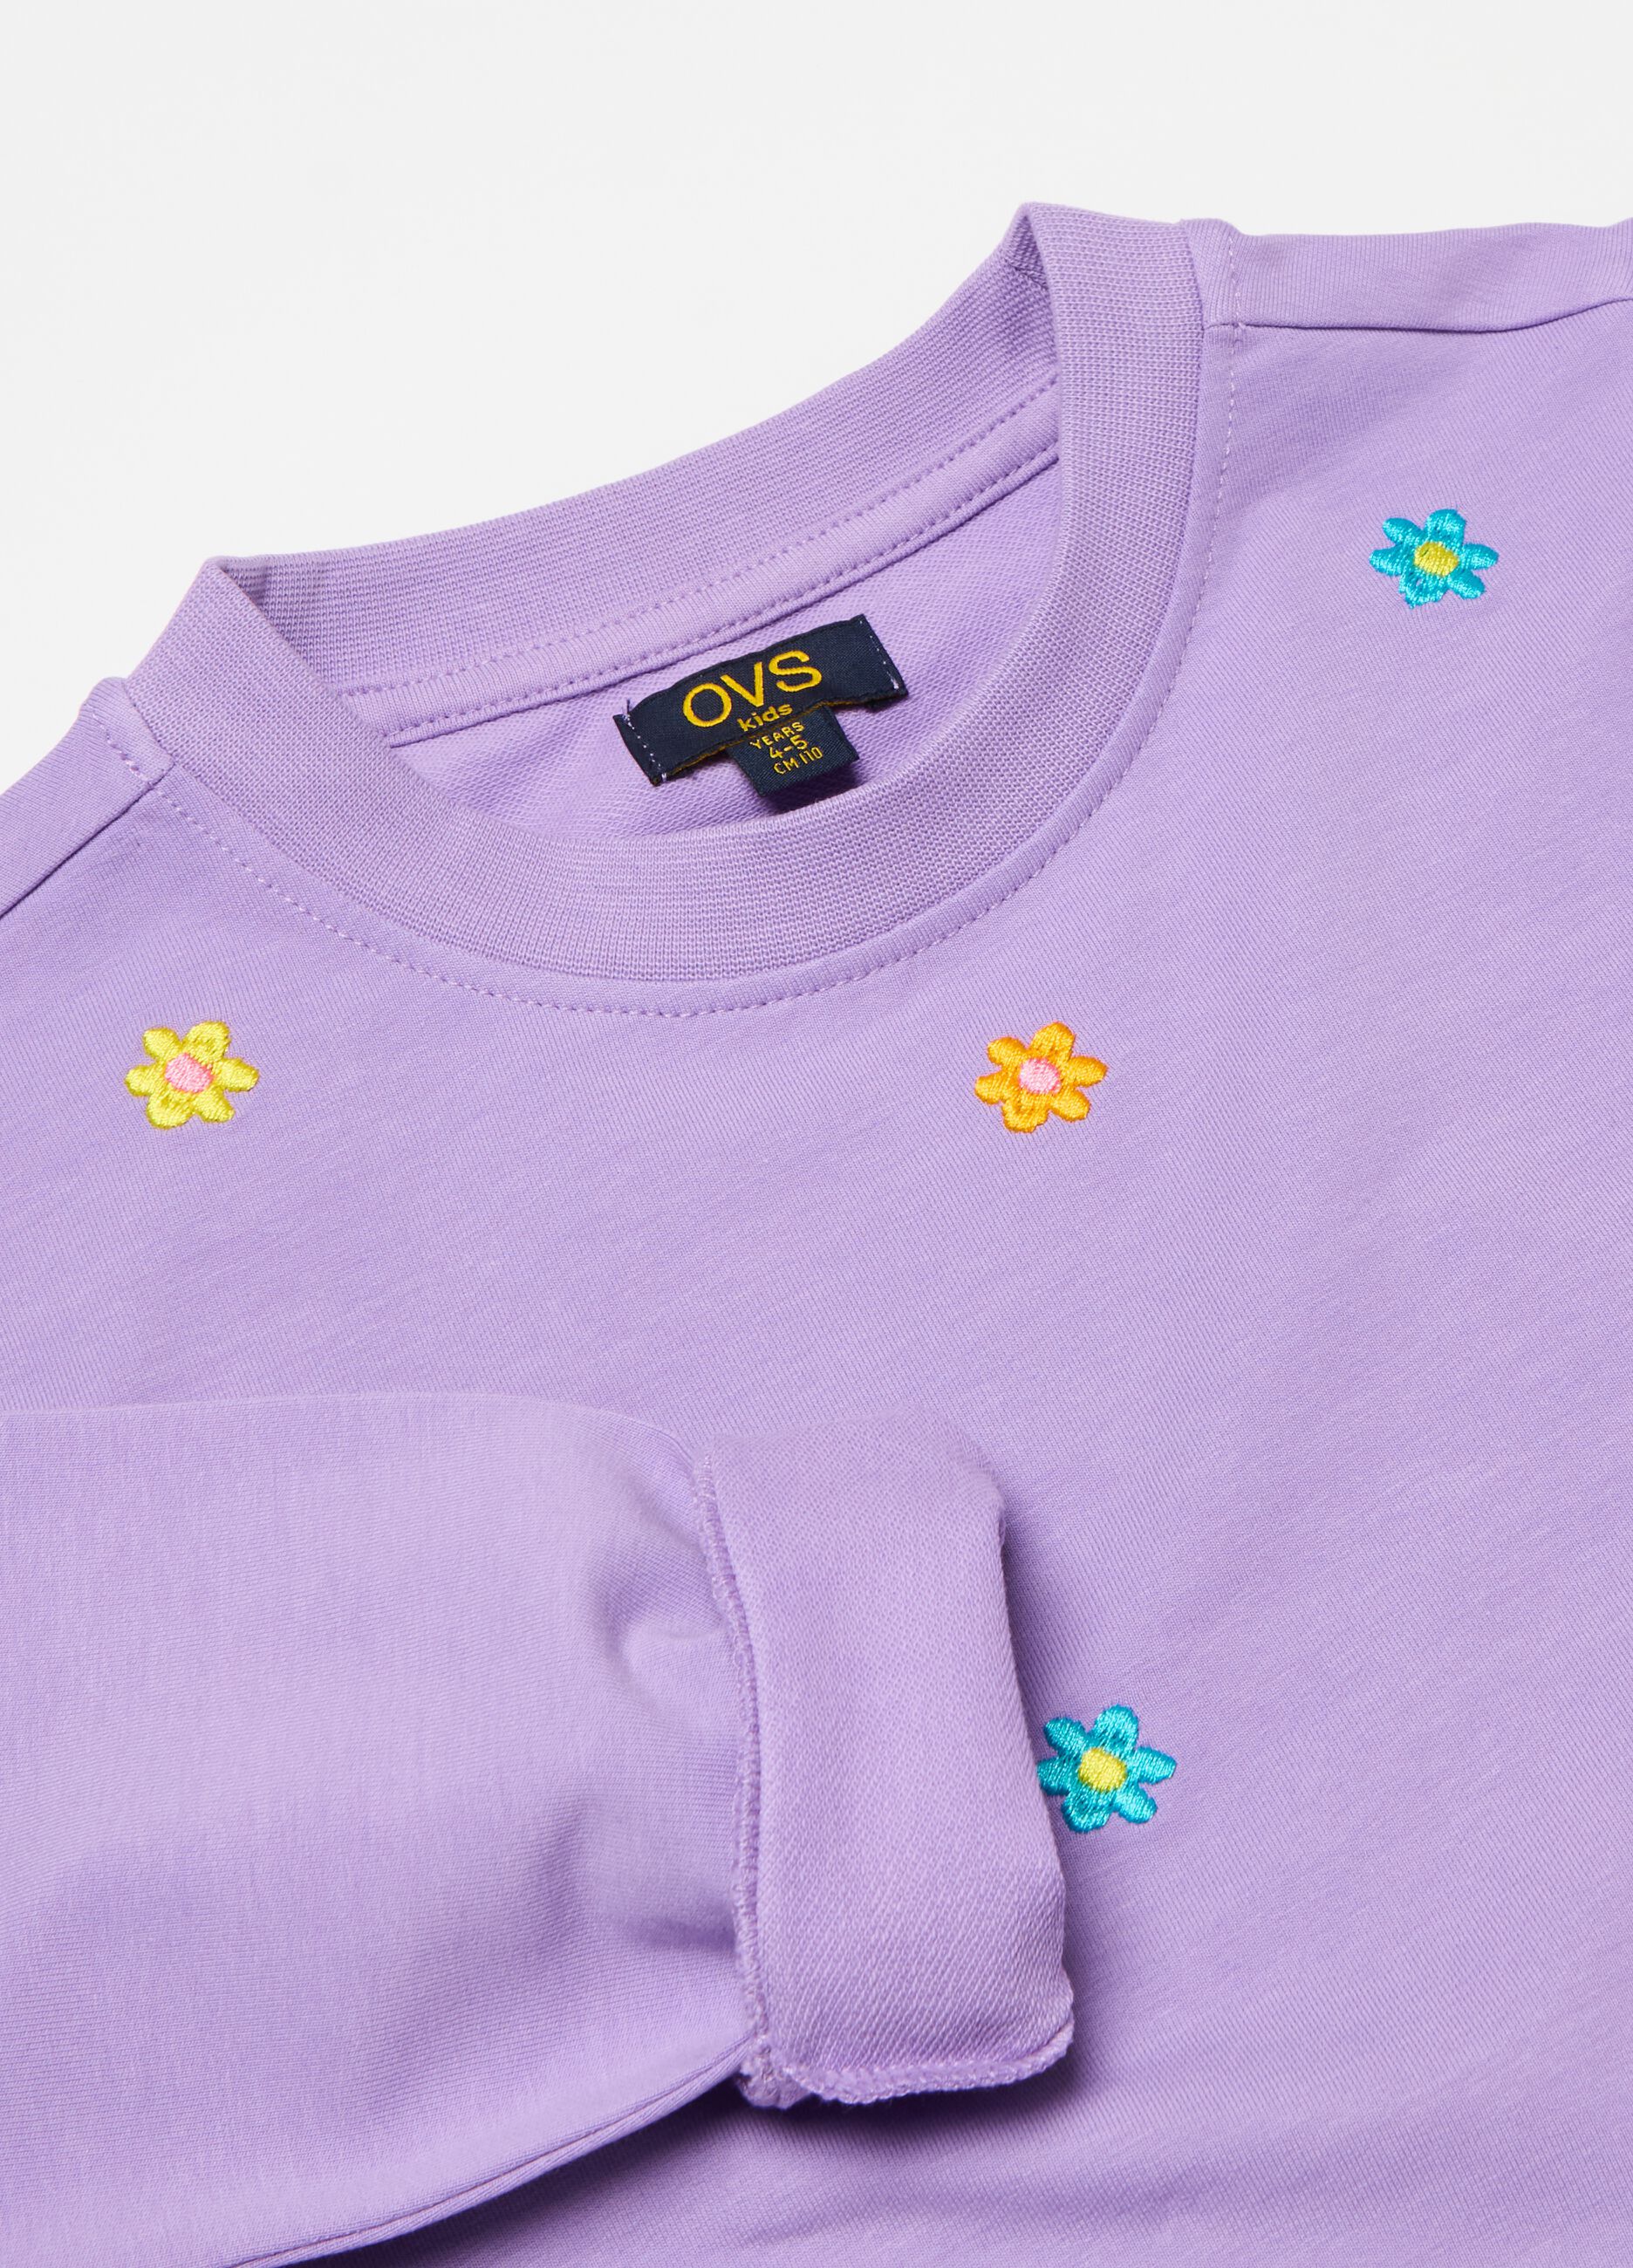 Sweatshirt with small flowers embroidery